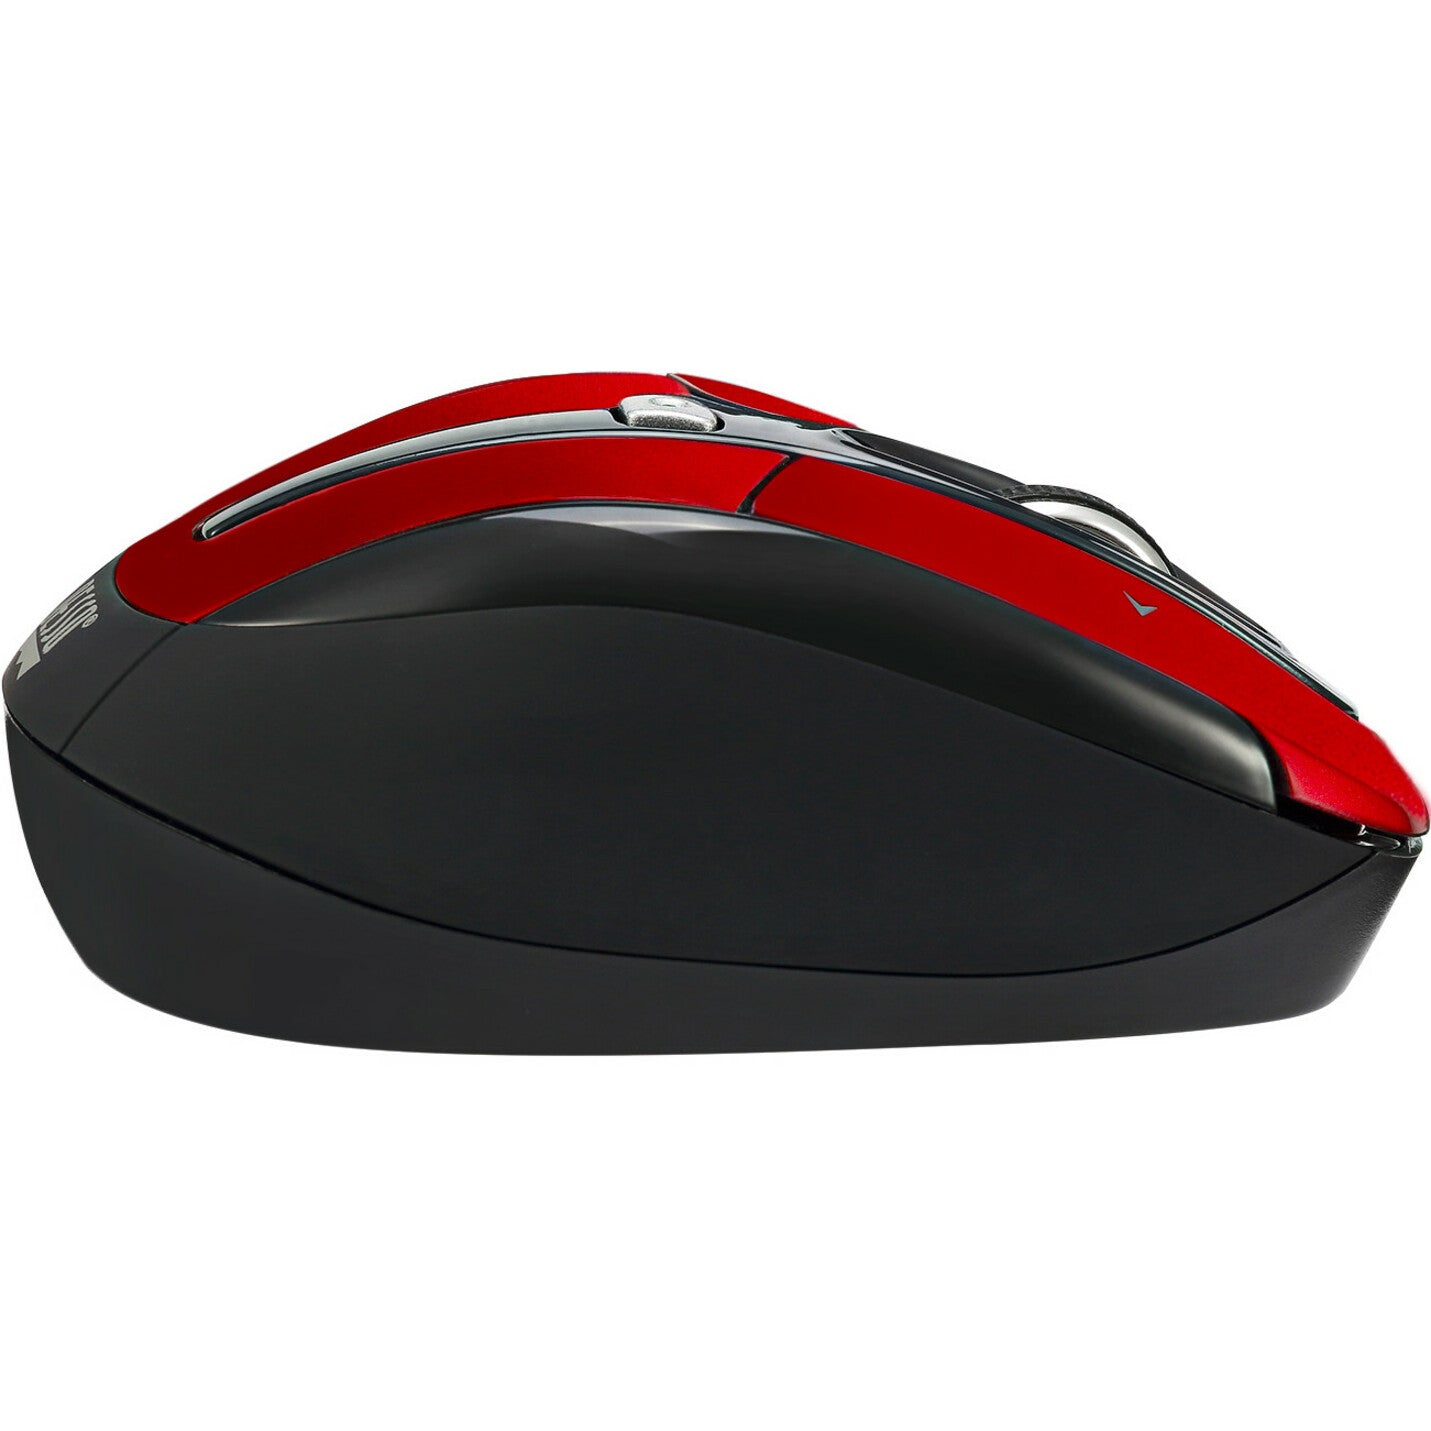 Adesso IMOUSES60R iMouse S60R 2.4 GHz Wireless Programmable Nano Mouse, Ergonomic Fit, 1600 dpi, Red